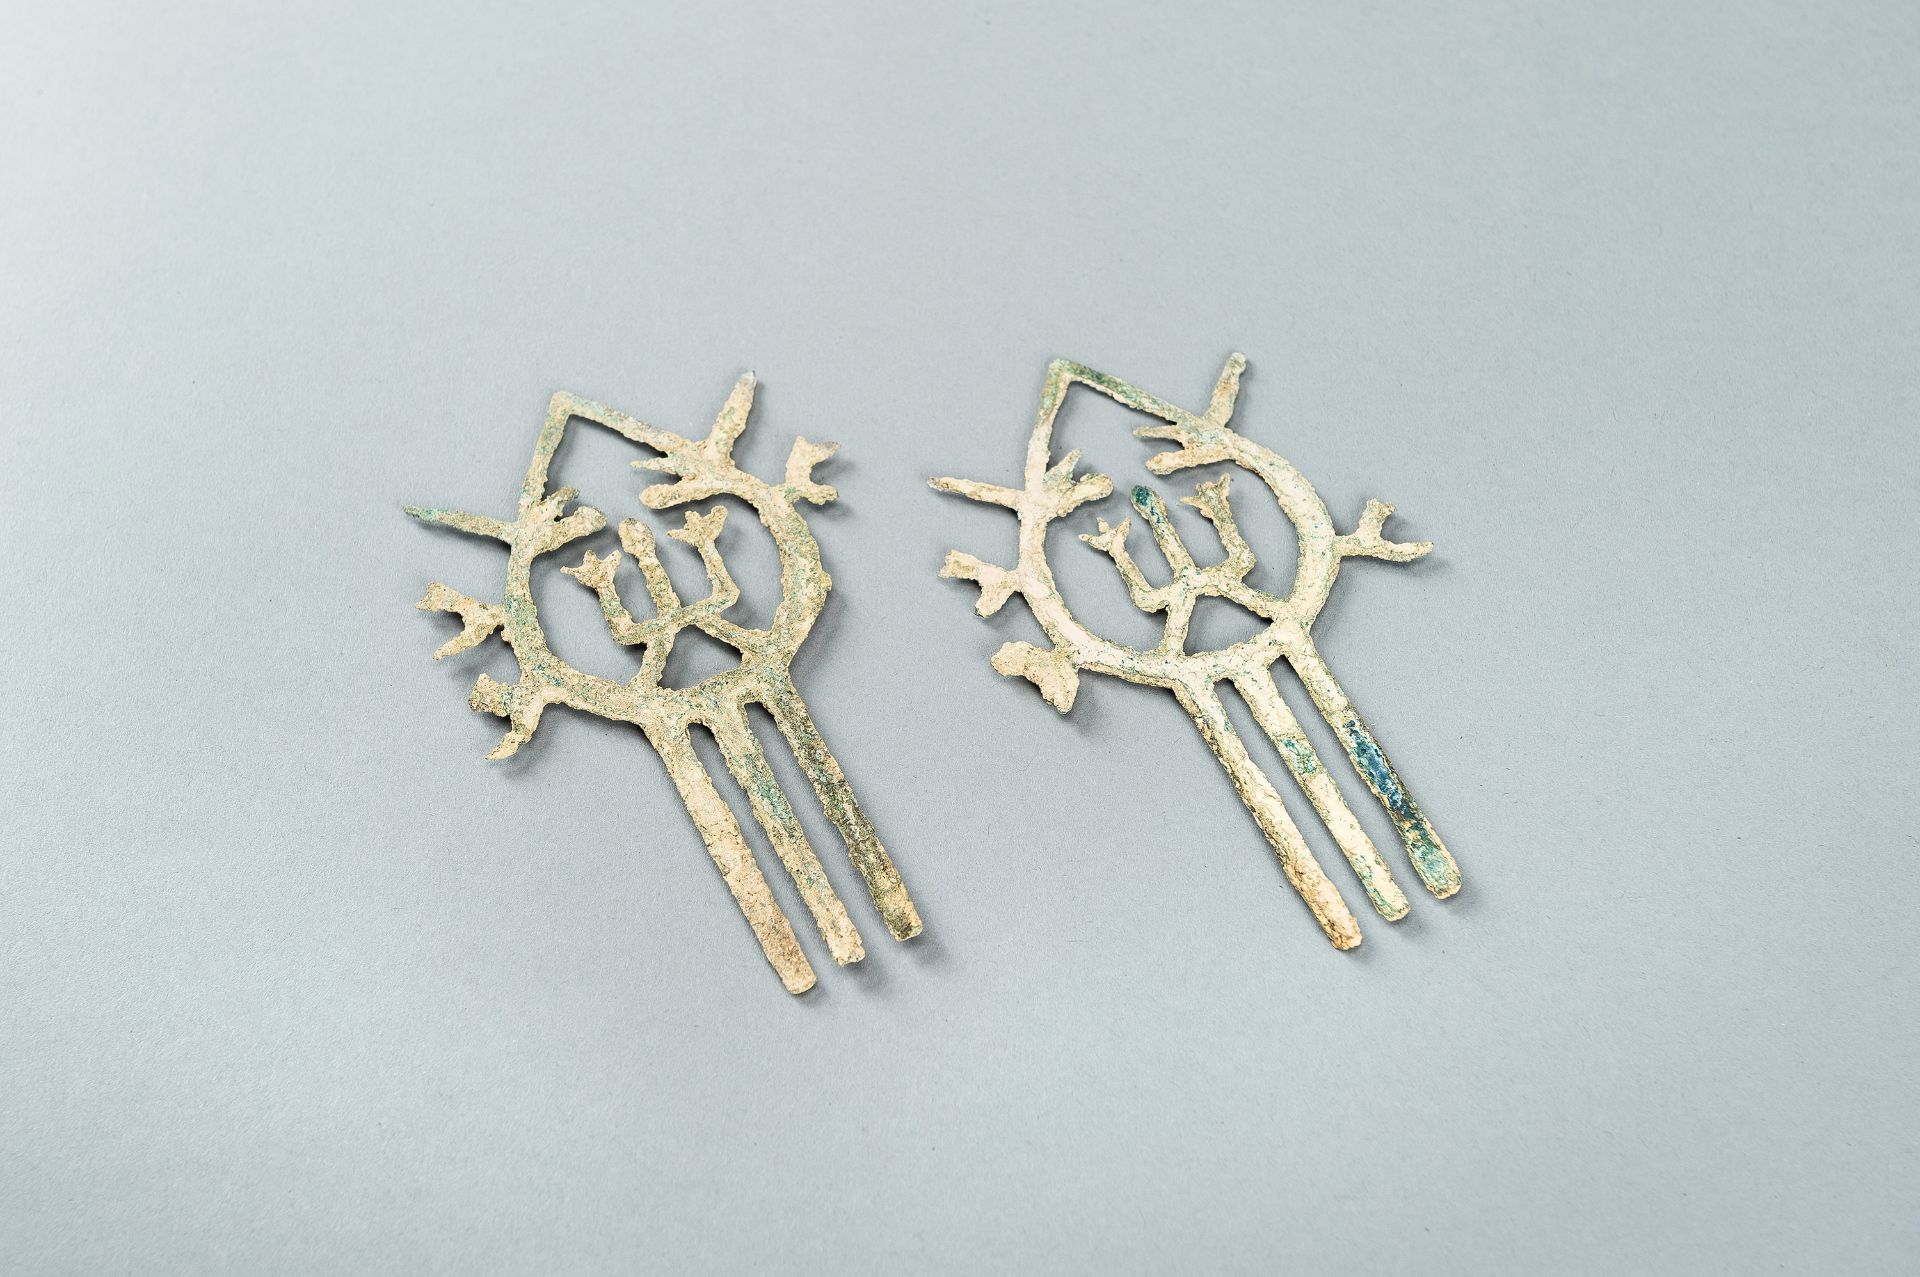 A PAIR OF BRONZE HAIRPINS, DONG SON CULTURE - Image 8 of 11